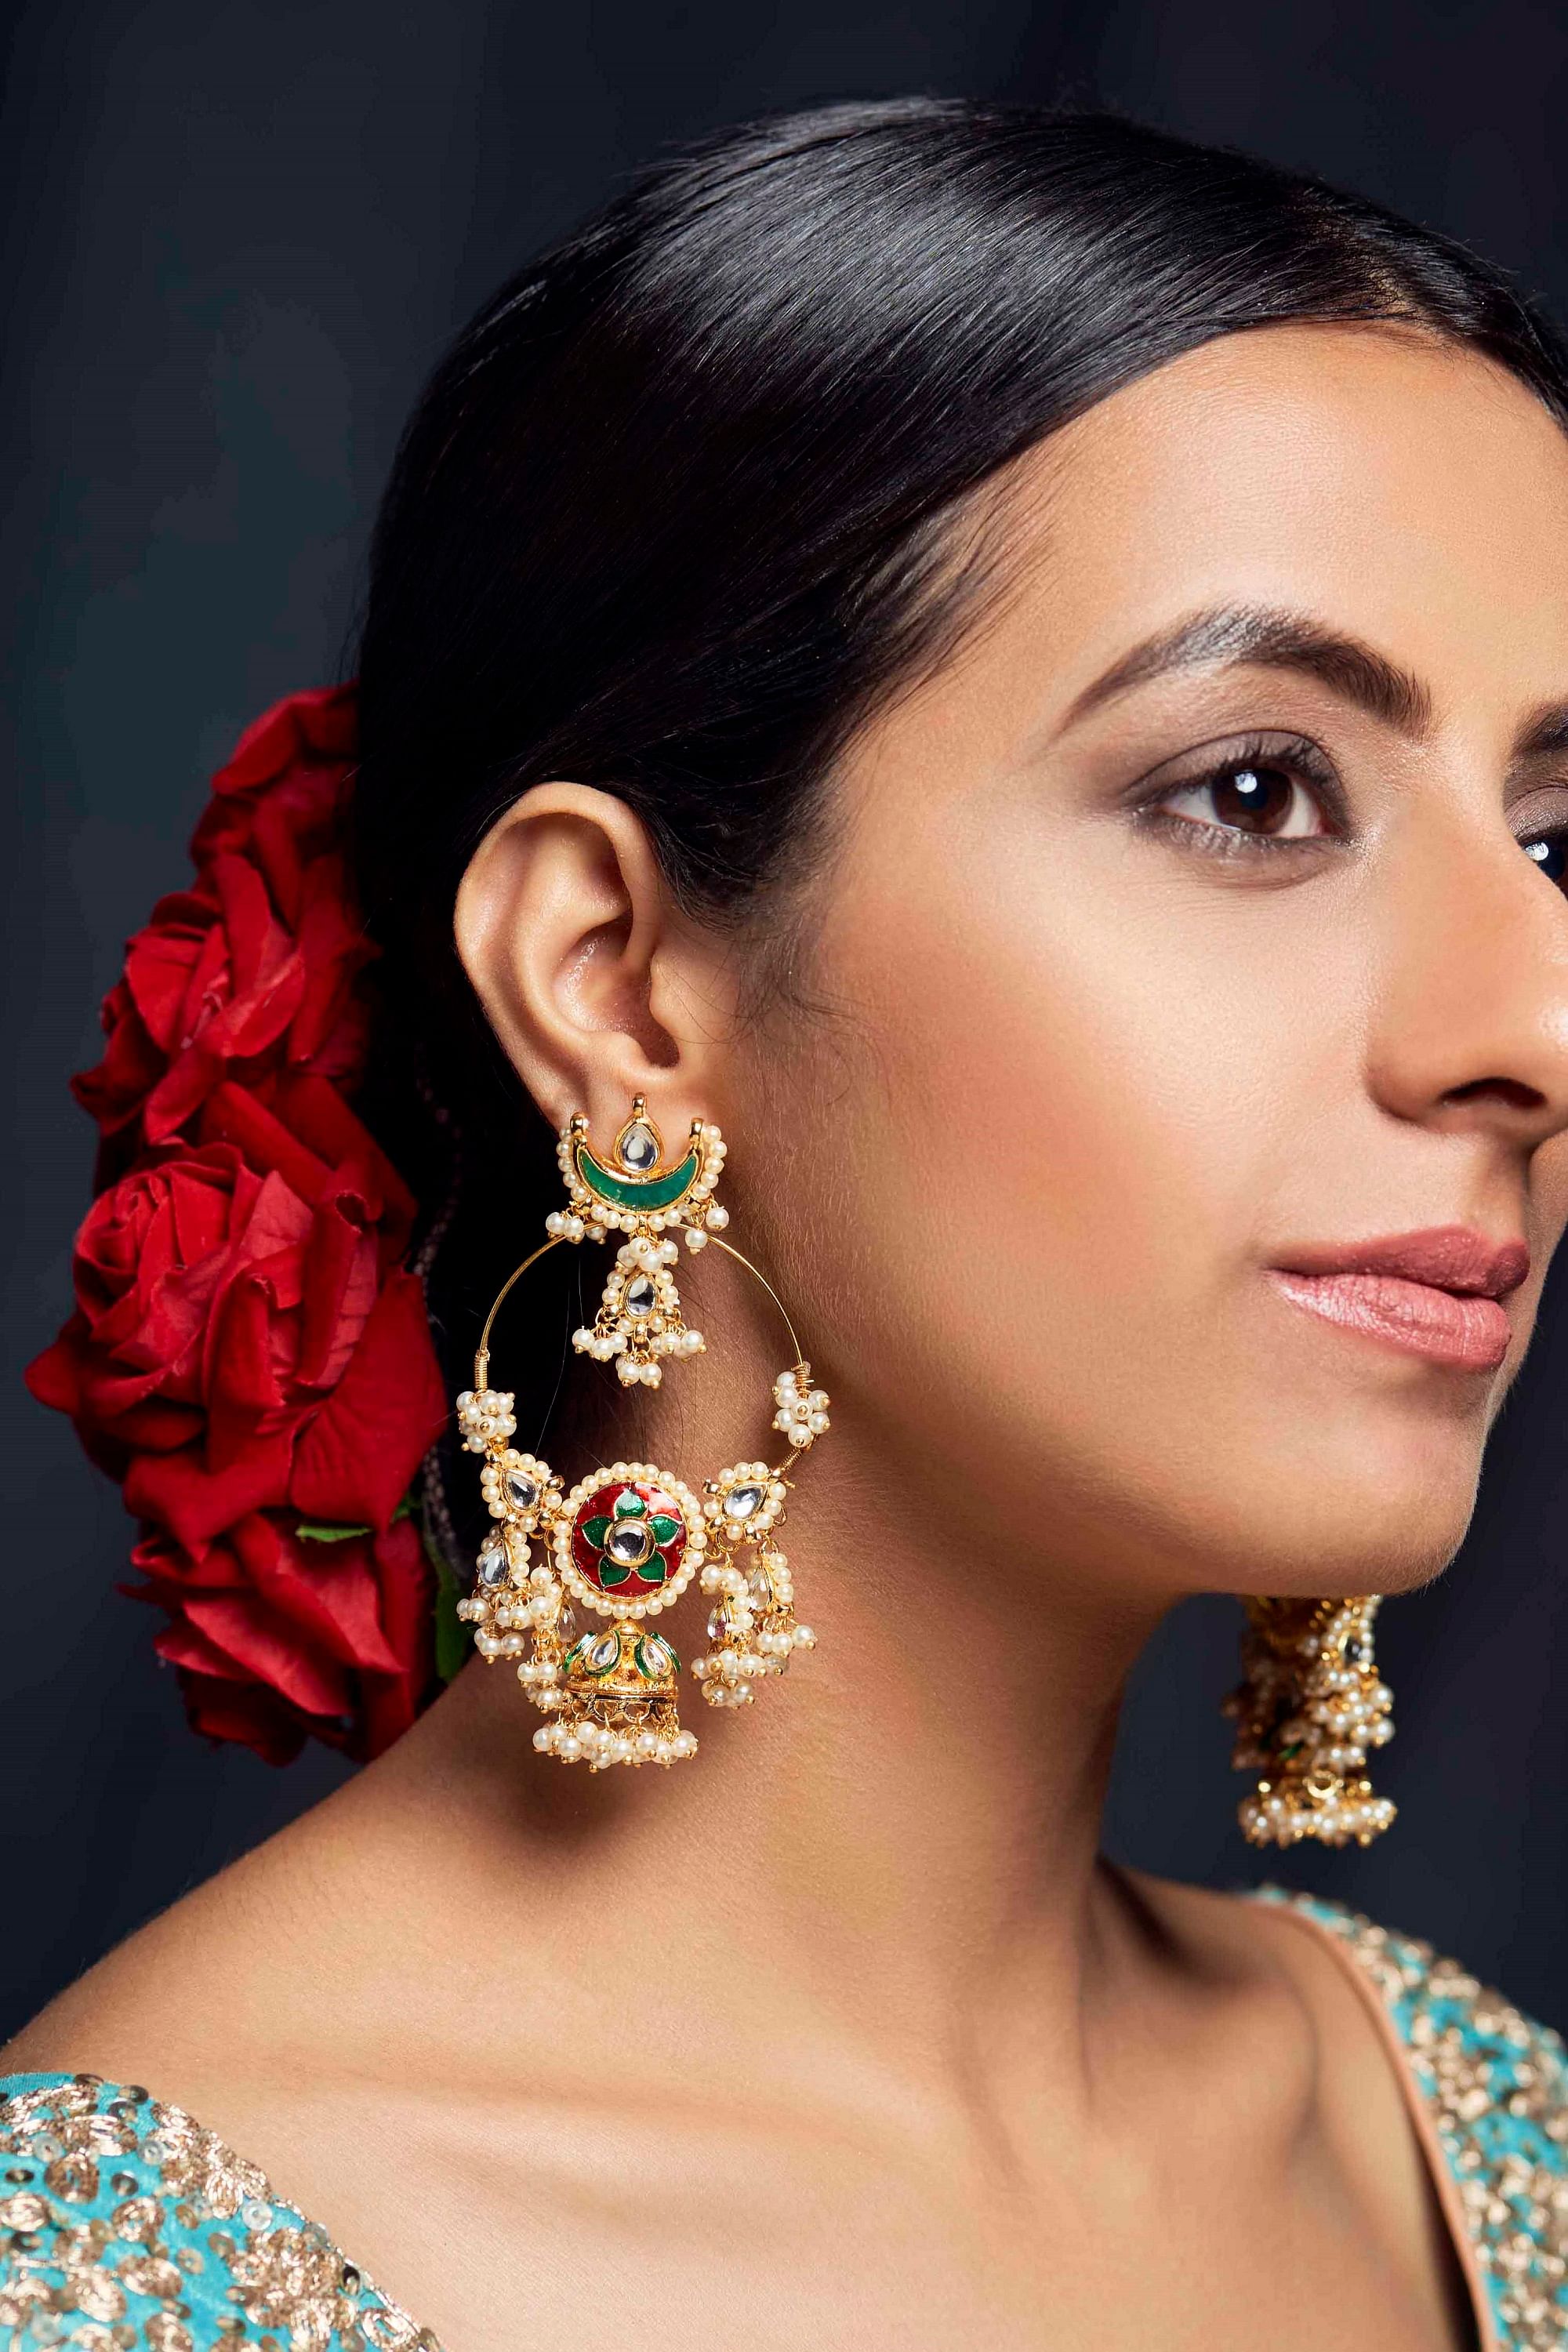 Gold Chandbali Earrings Studded with Pearls GER 062